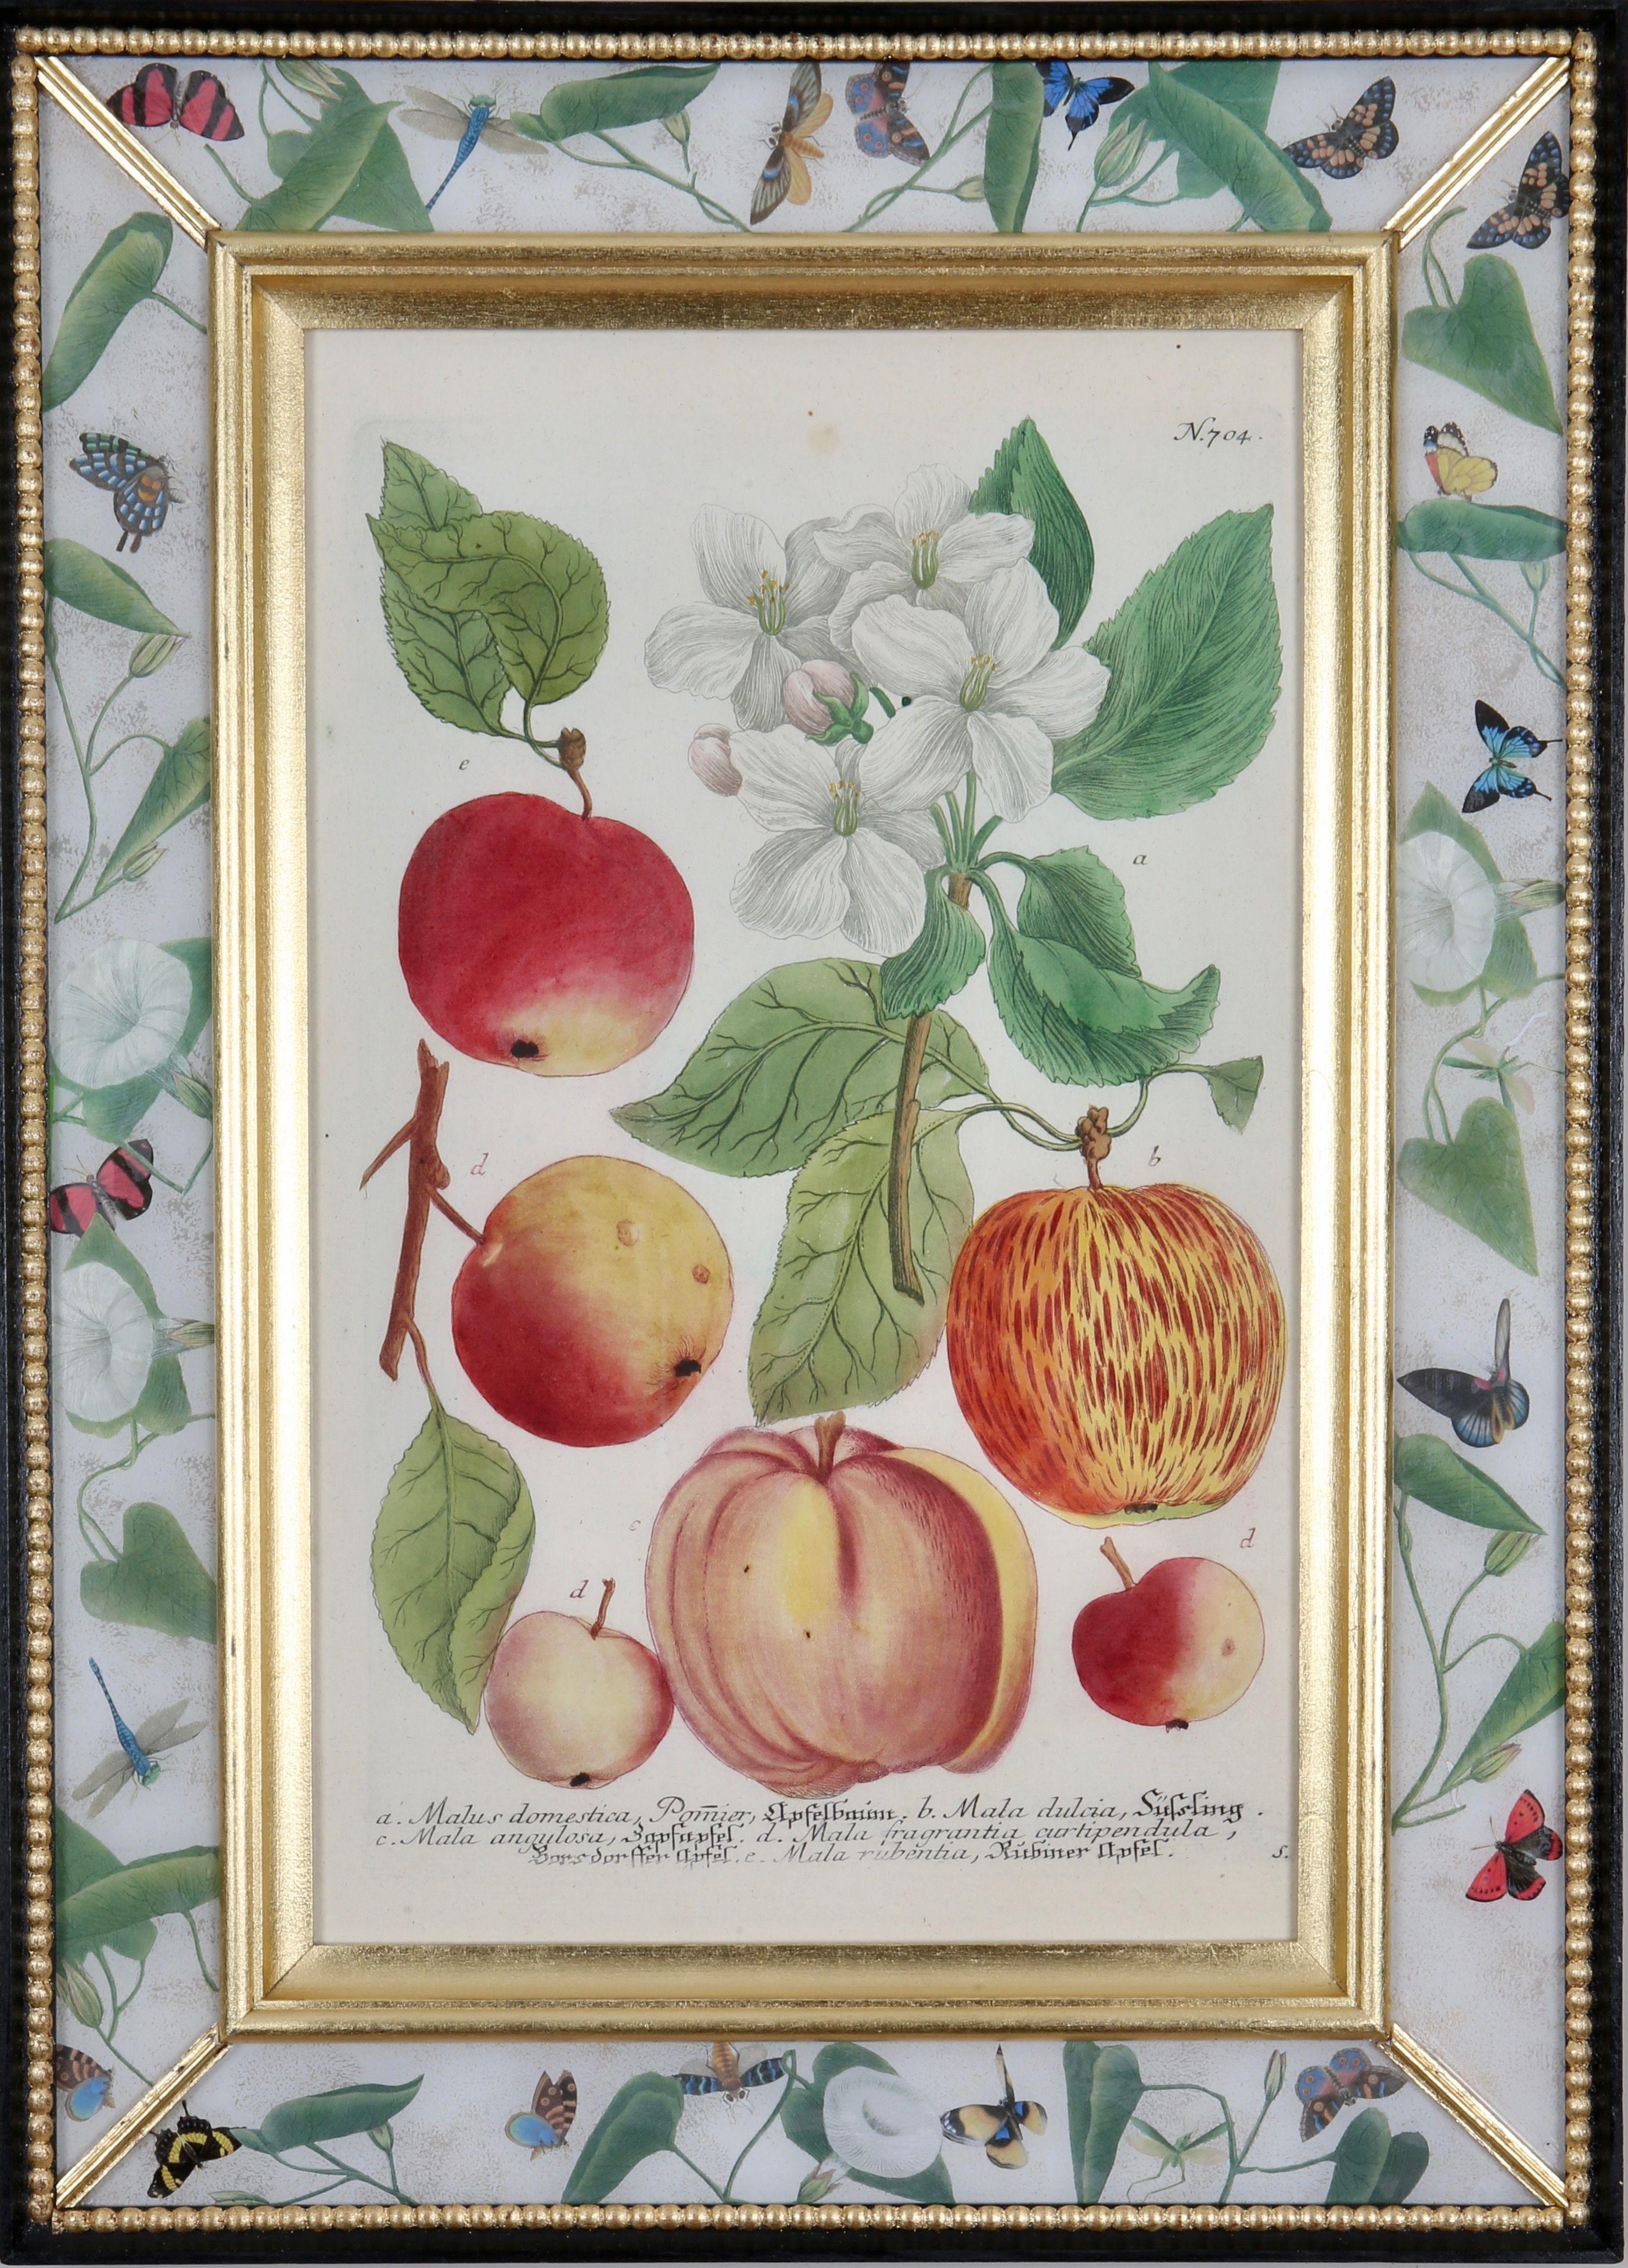 Hand-coloured mezzotint engravings from: ""Phytanthoza Iconographia"",  c1739, presented in hand-made parcel-gilt, ebonised and decalcomania frames.

Johann Weinmann (1683-1741), a German pharmacist and apothecary, was author and publisher of